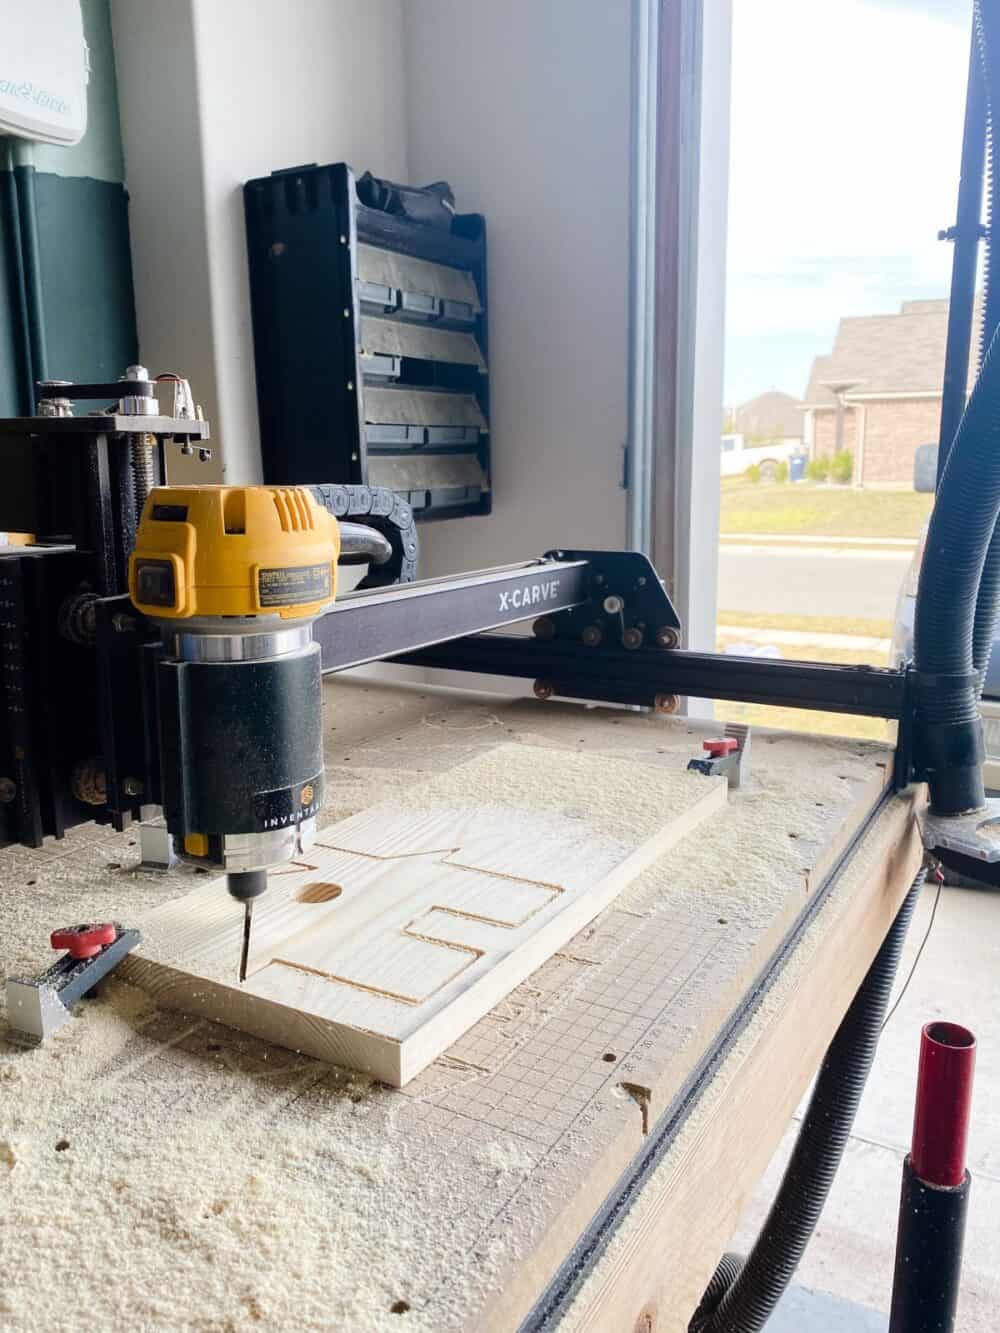 X-Carve machine cutting out a house for a Christmas village